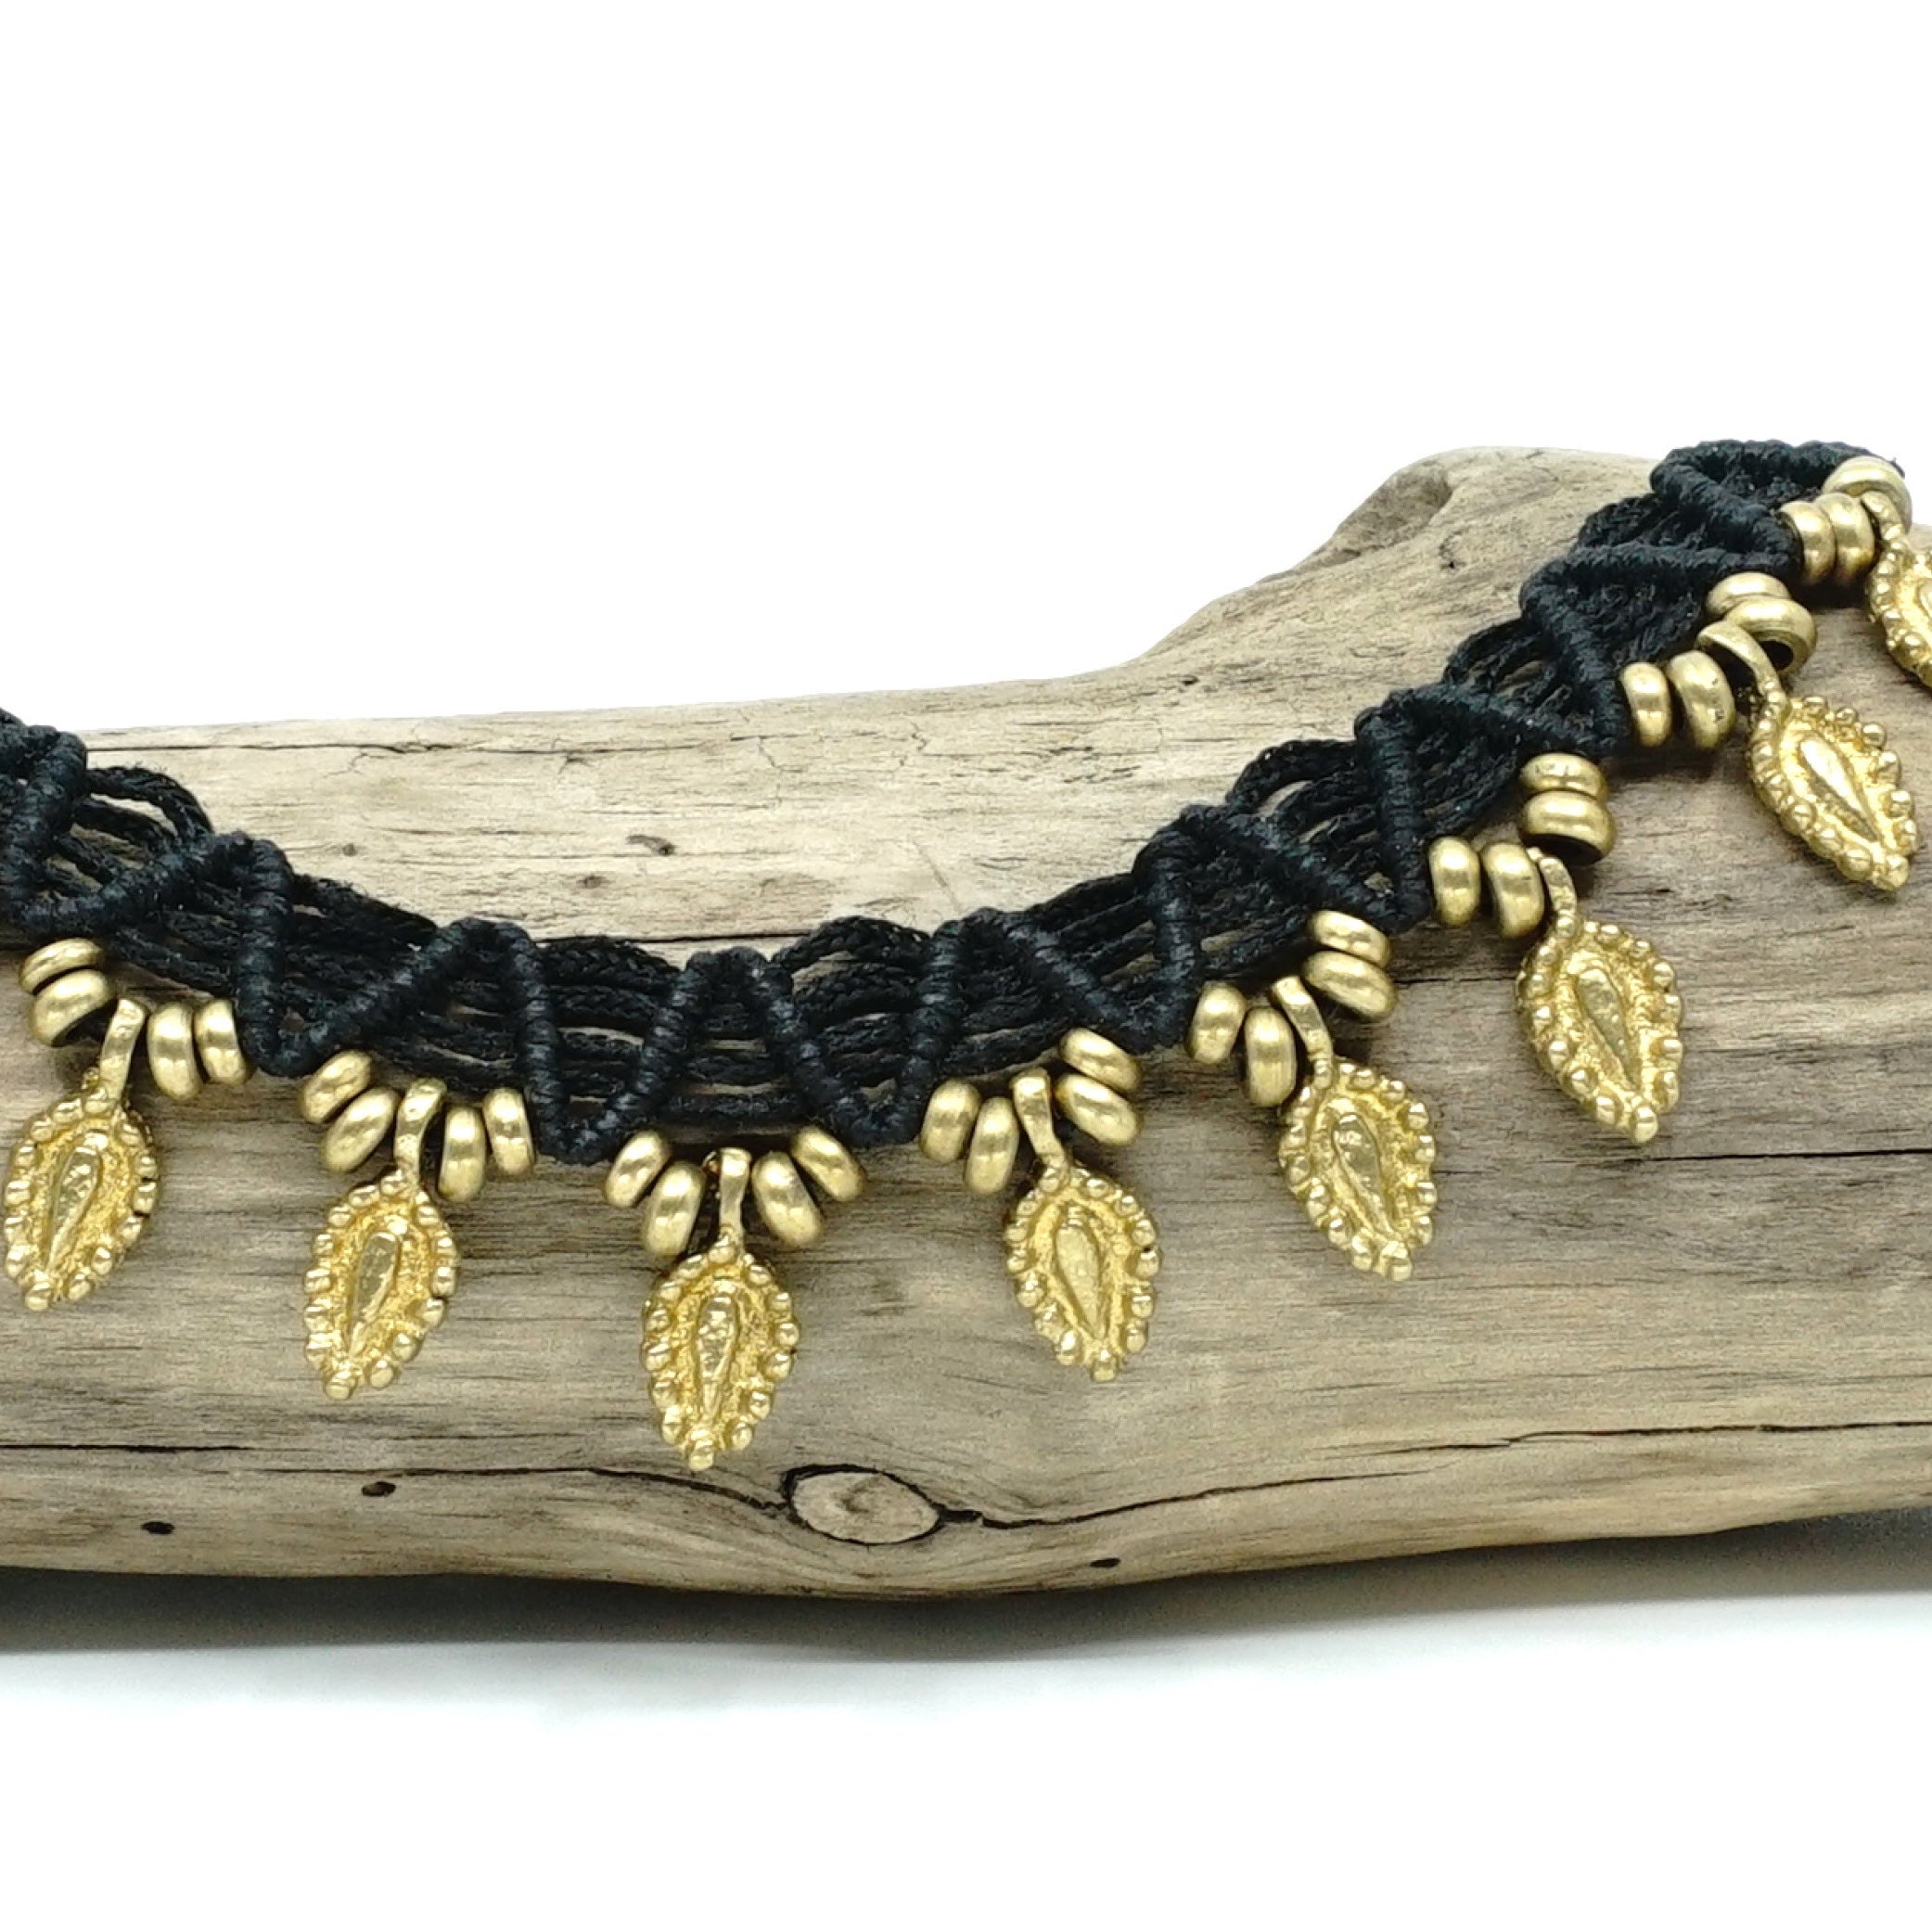 The Caviar Featherdrop Anklet